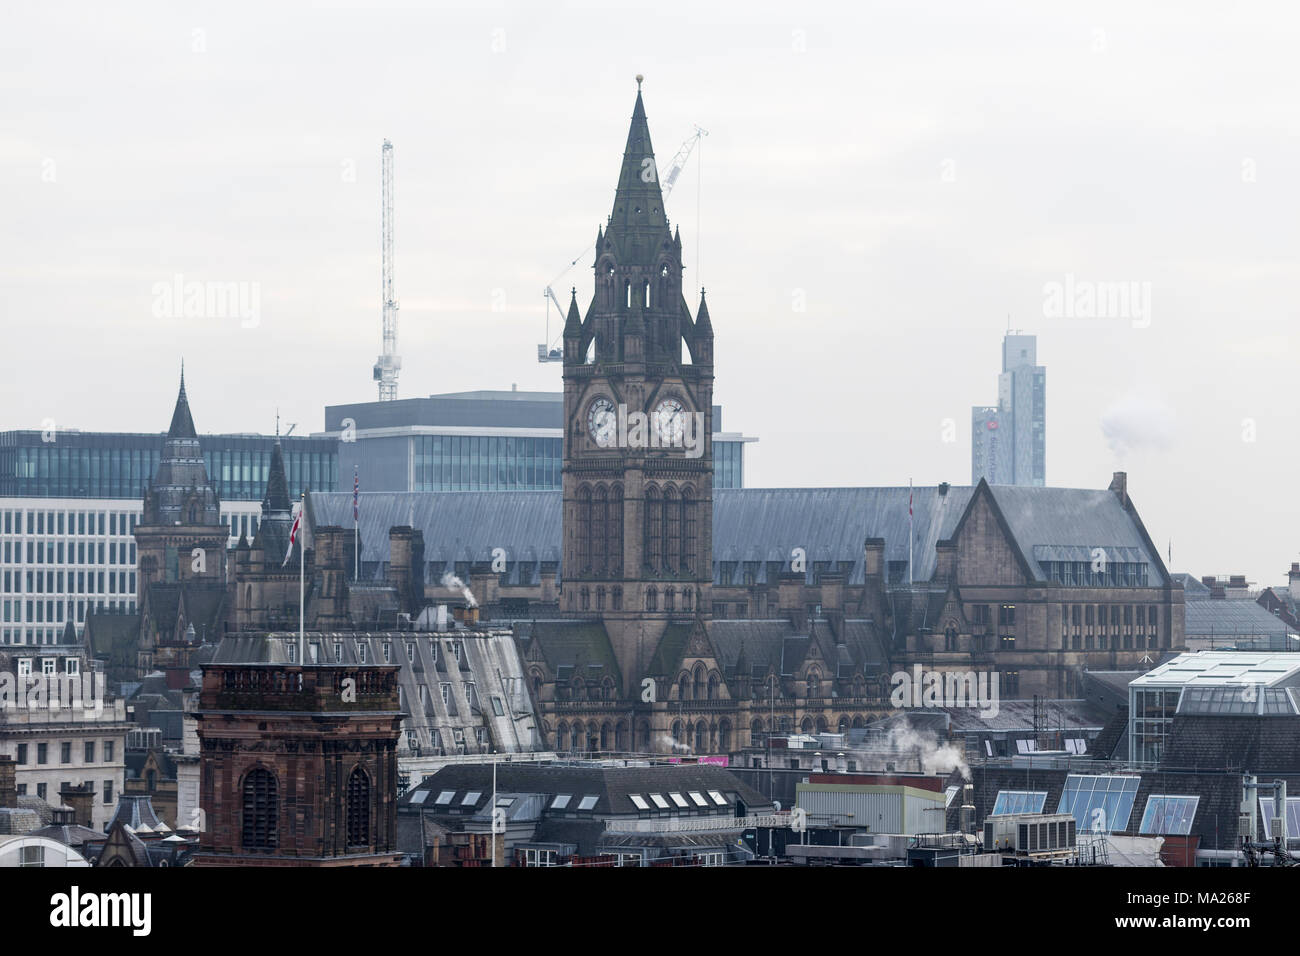 Lo skyline di Manchester che mostra Manchester Town Hall clock tower Foto Stock